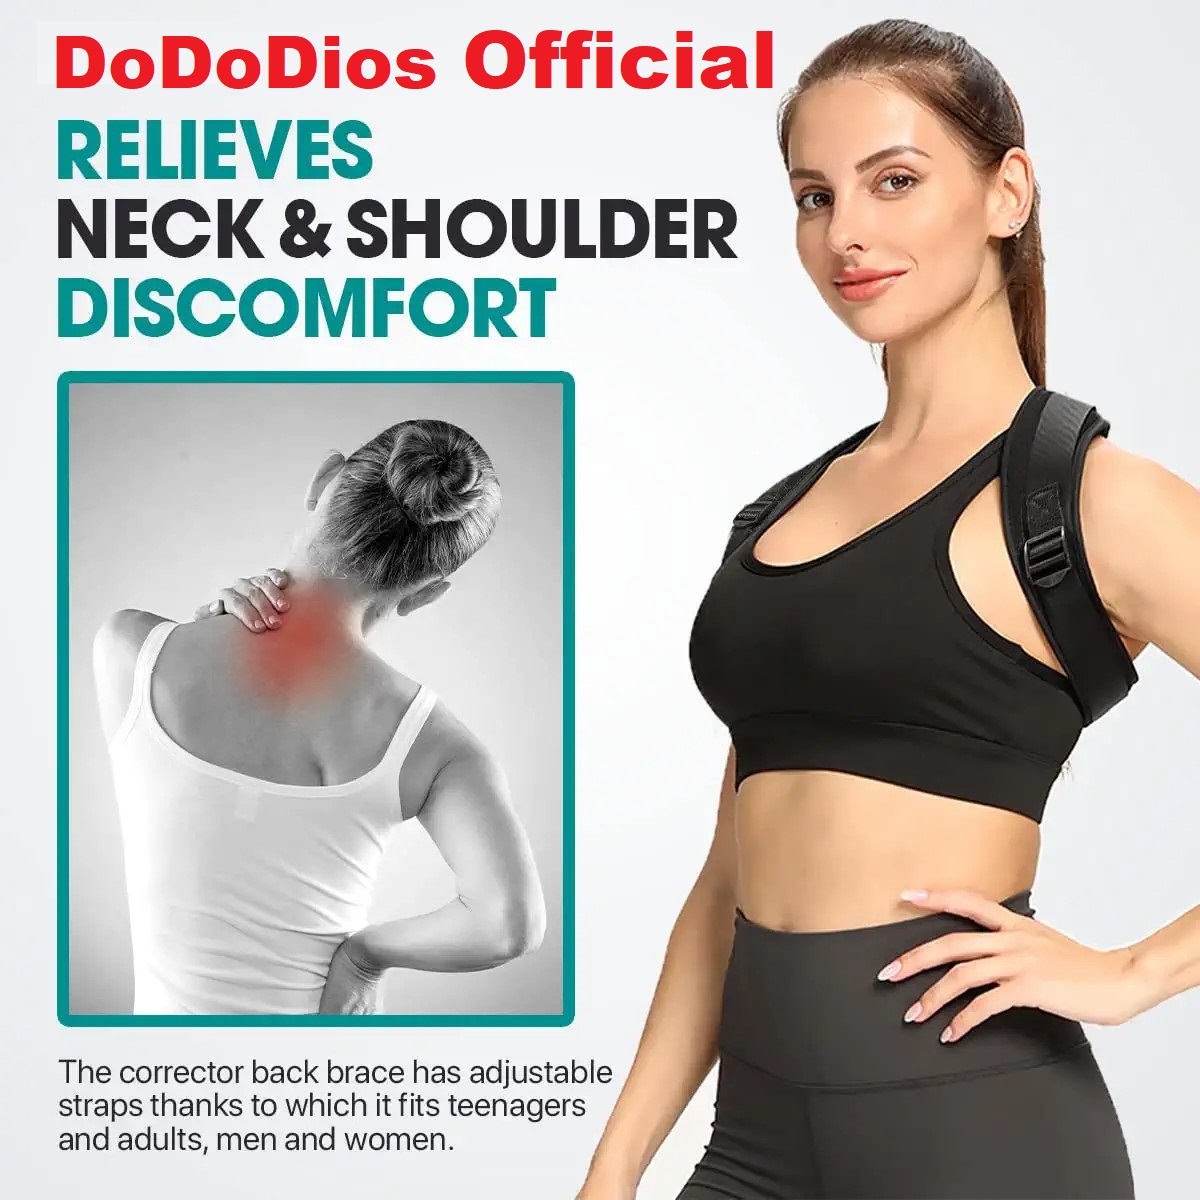 Posture Corrector for Women and Men - Invisible & Adjustable Upper Back Brace for Clavicle Support - Effective Straightener and Providing Pain Relief from Neck, Back, Shoulder - Đai chống gù lưng - Hàng chính hãng DoDoDios